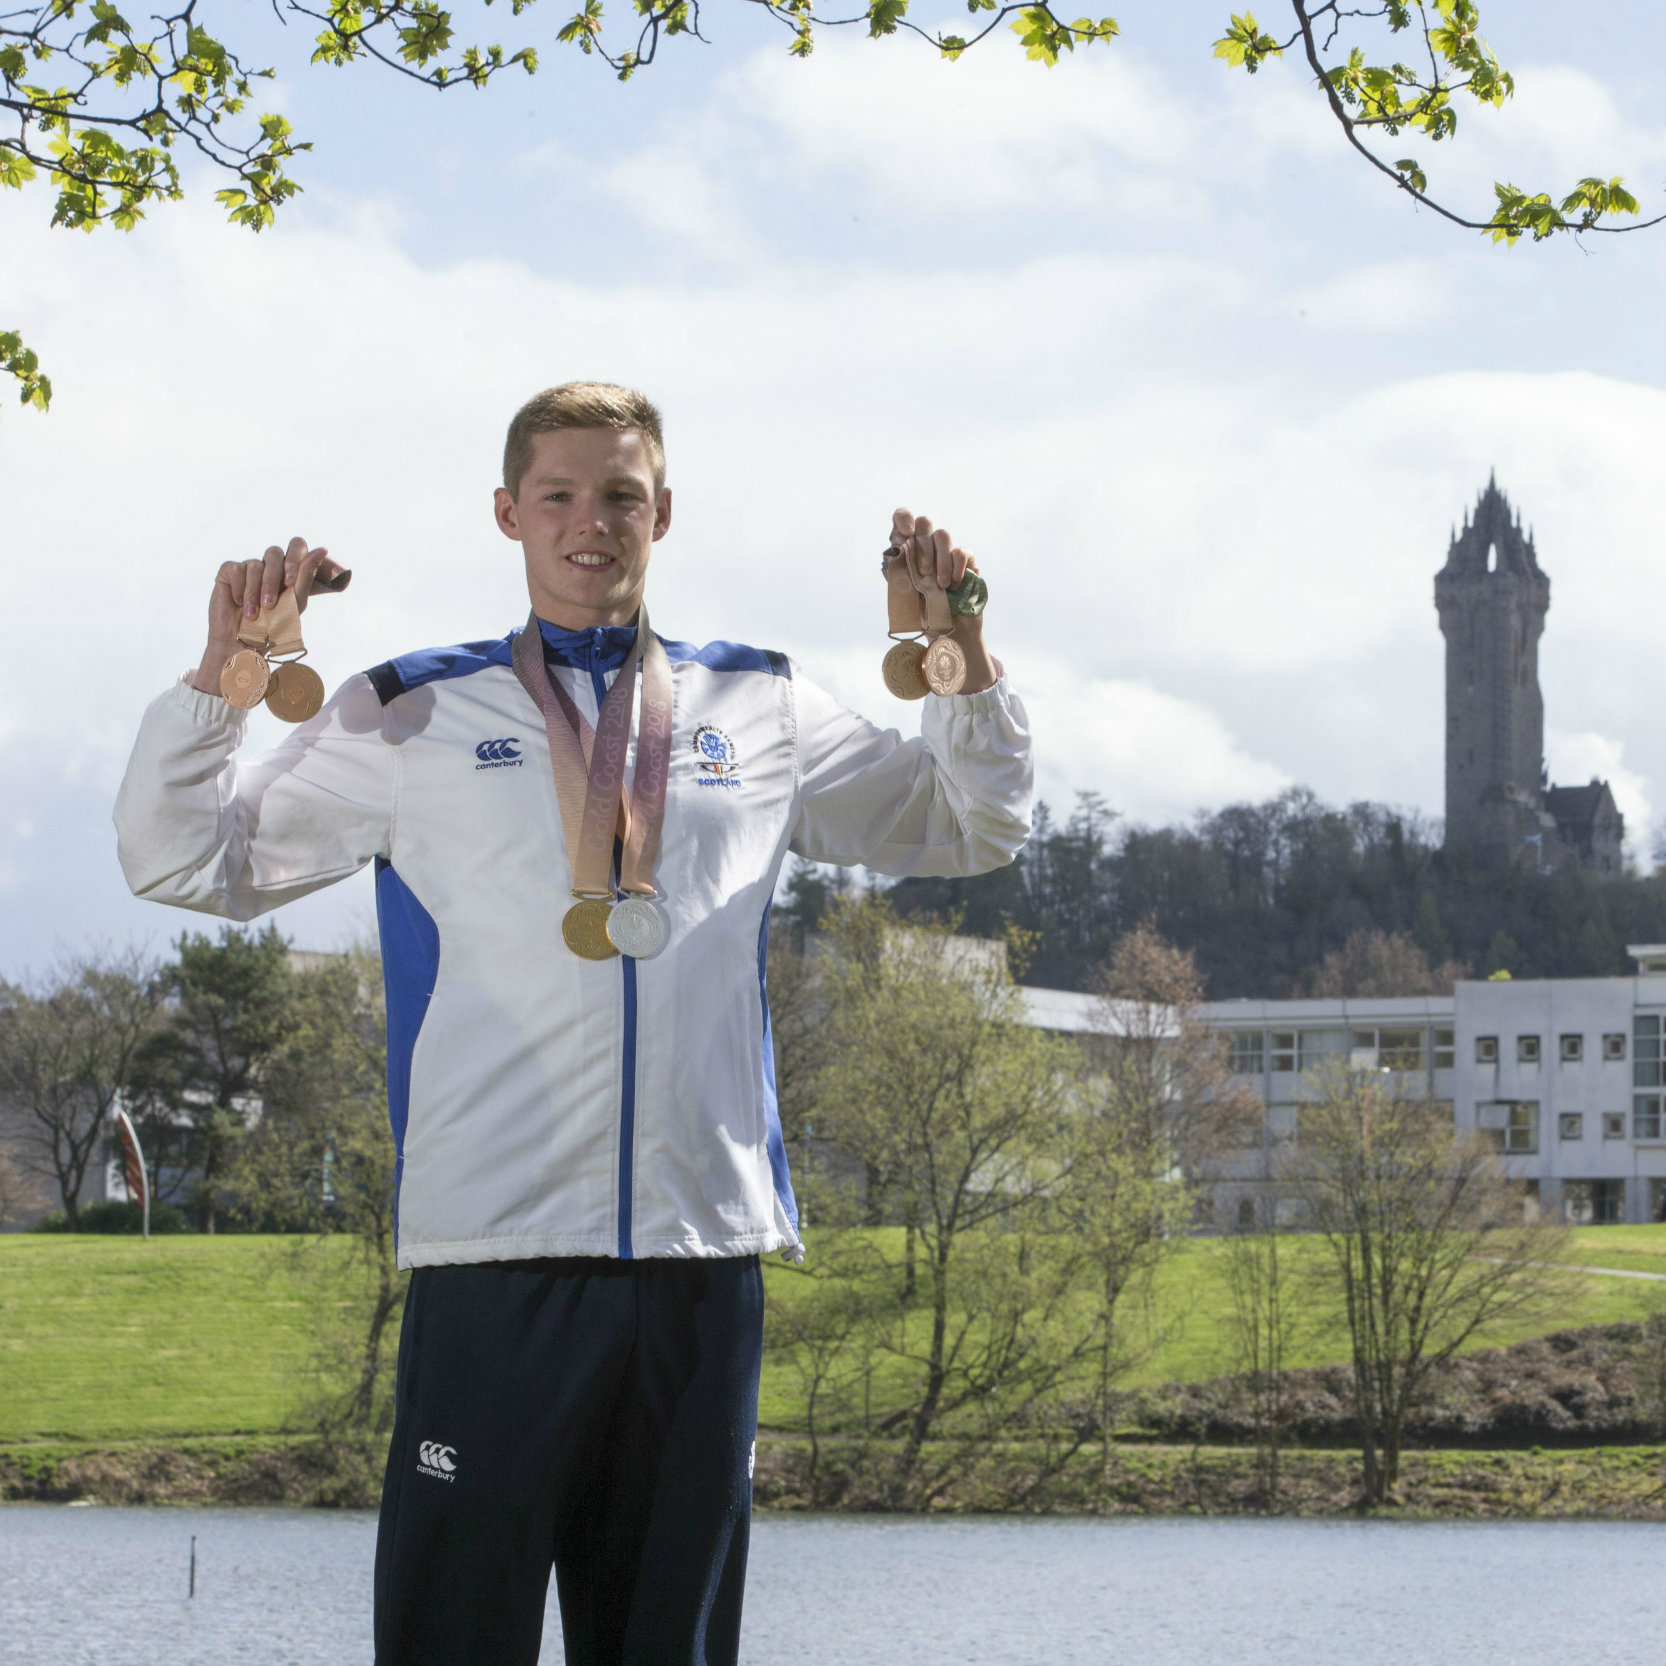 University of Stirling swimmer, Duncan Scott, brought home six medals from the G